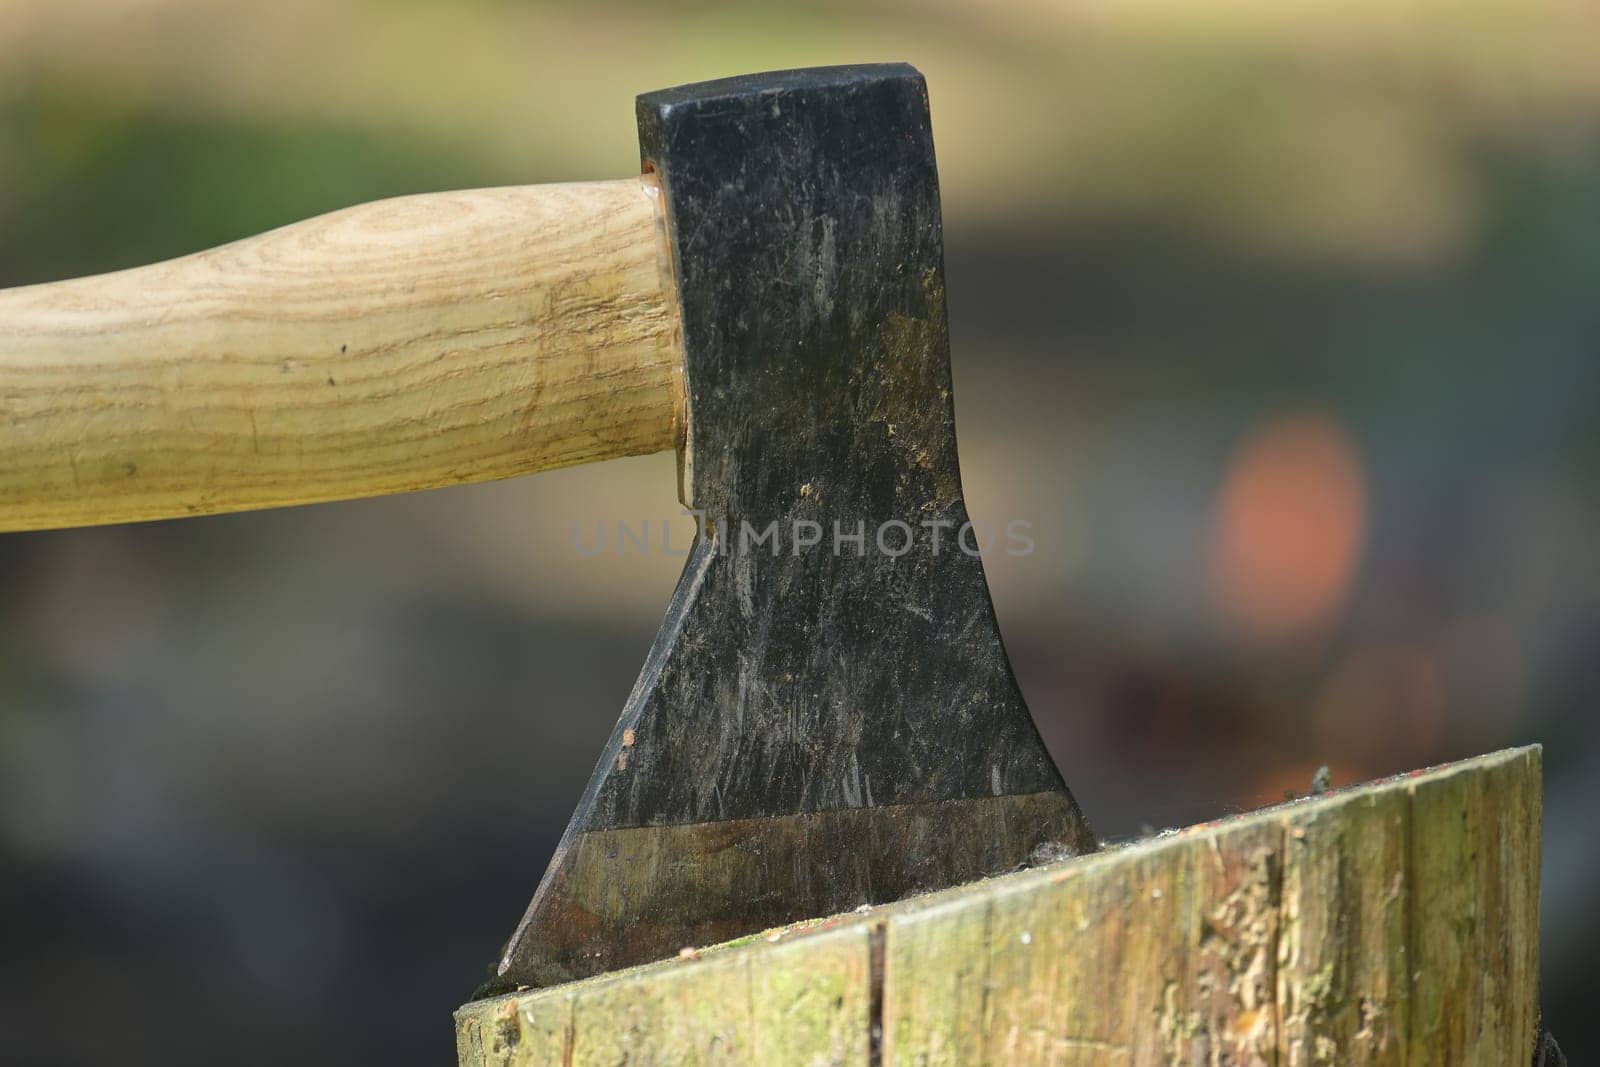 Closeup view of axe with a wooden handle embedded in a log of wood, with a campfire in the background, survival or historical recreation, leisure activities and relaxation around a fire